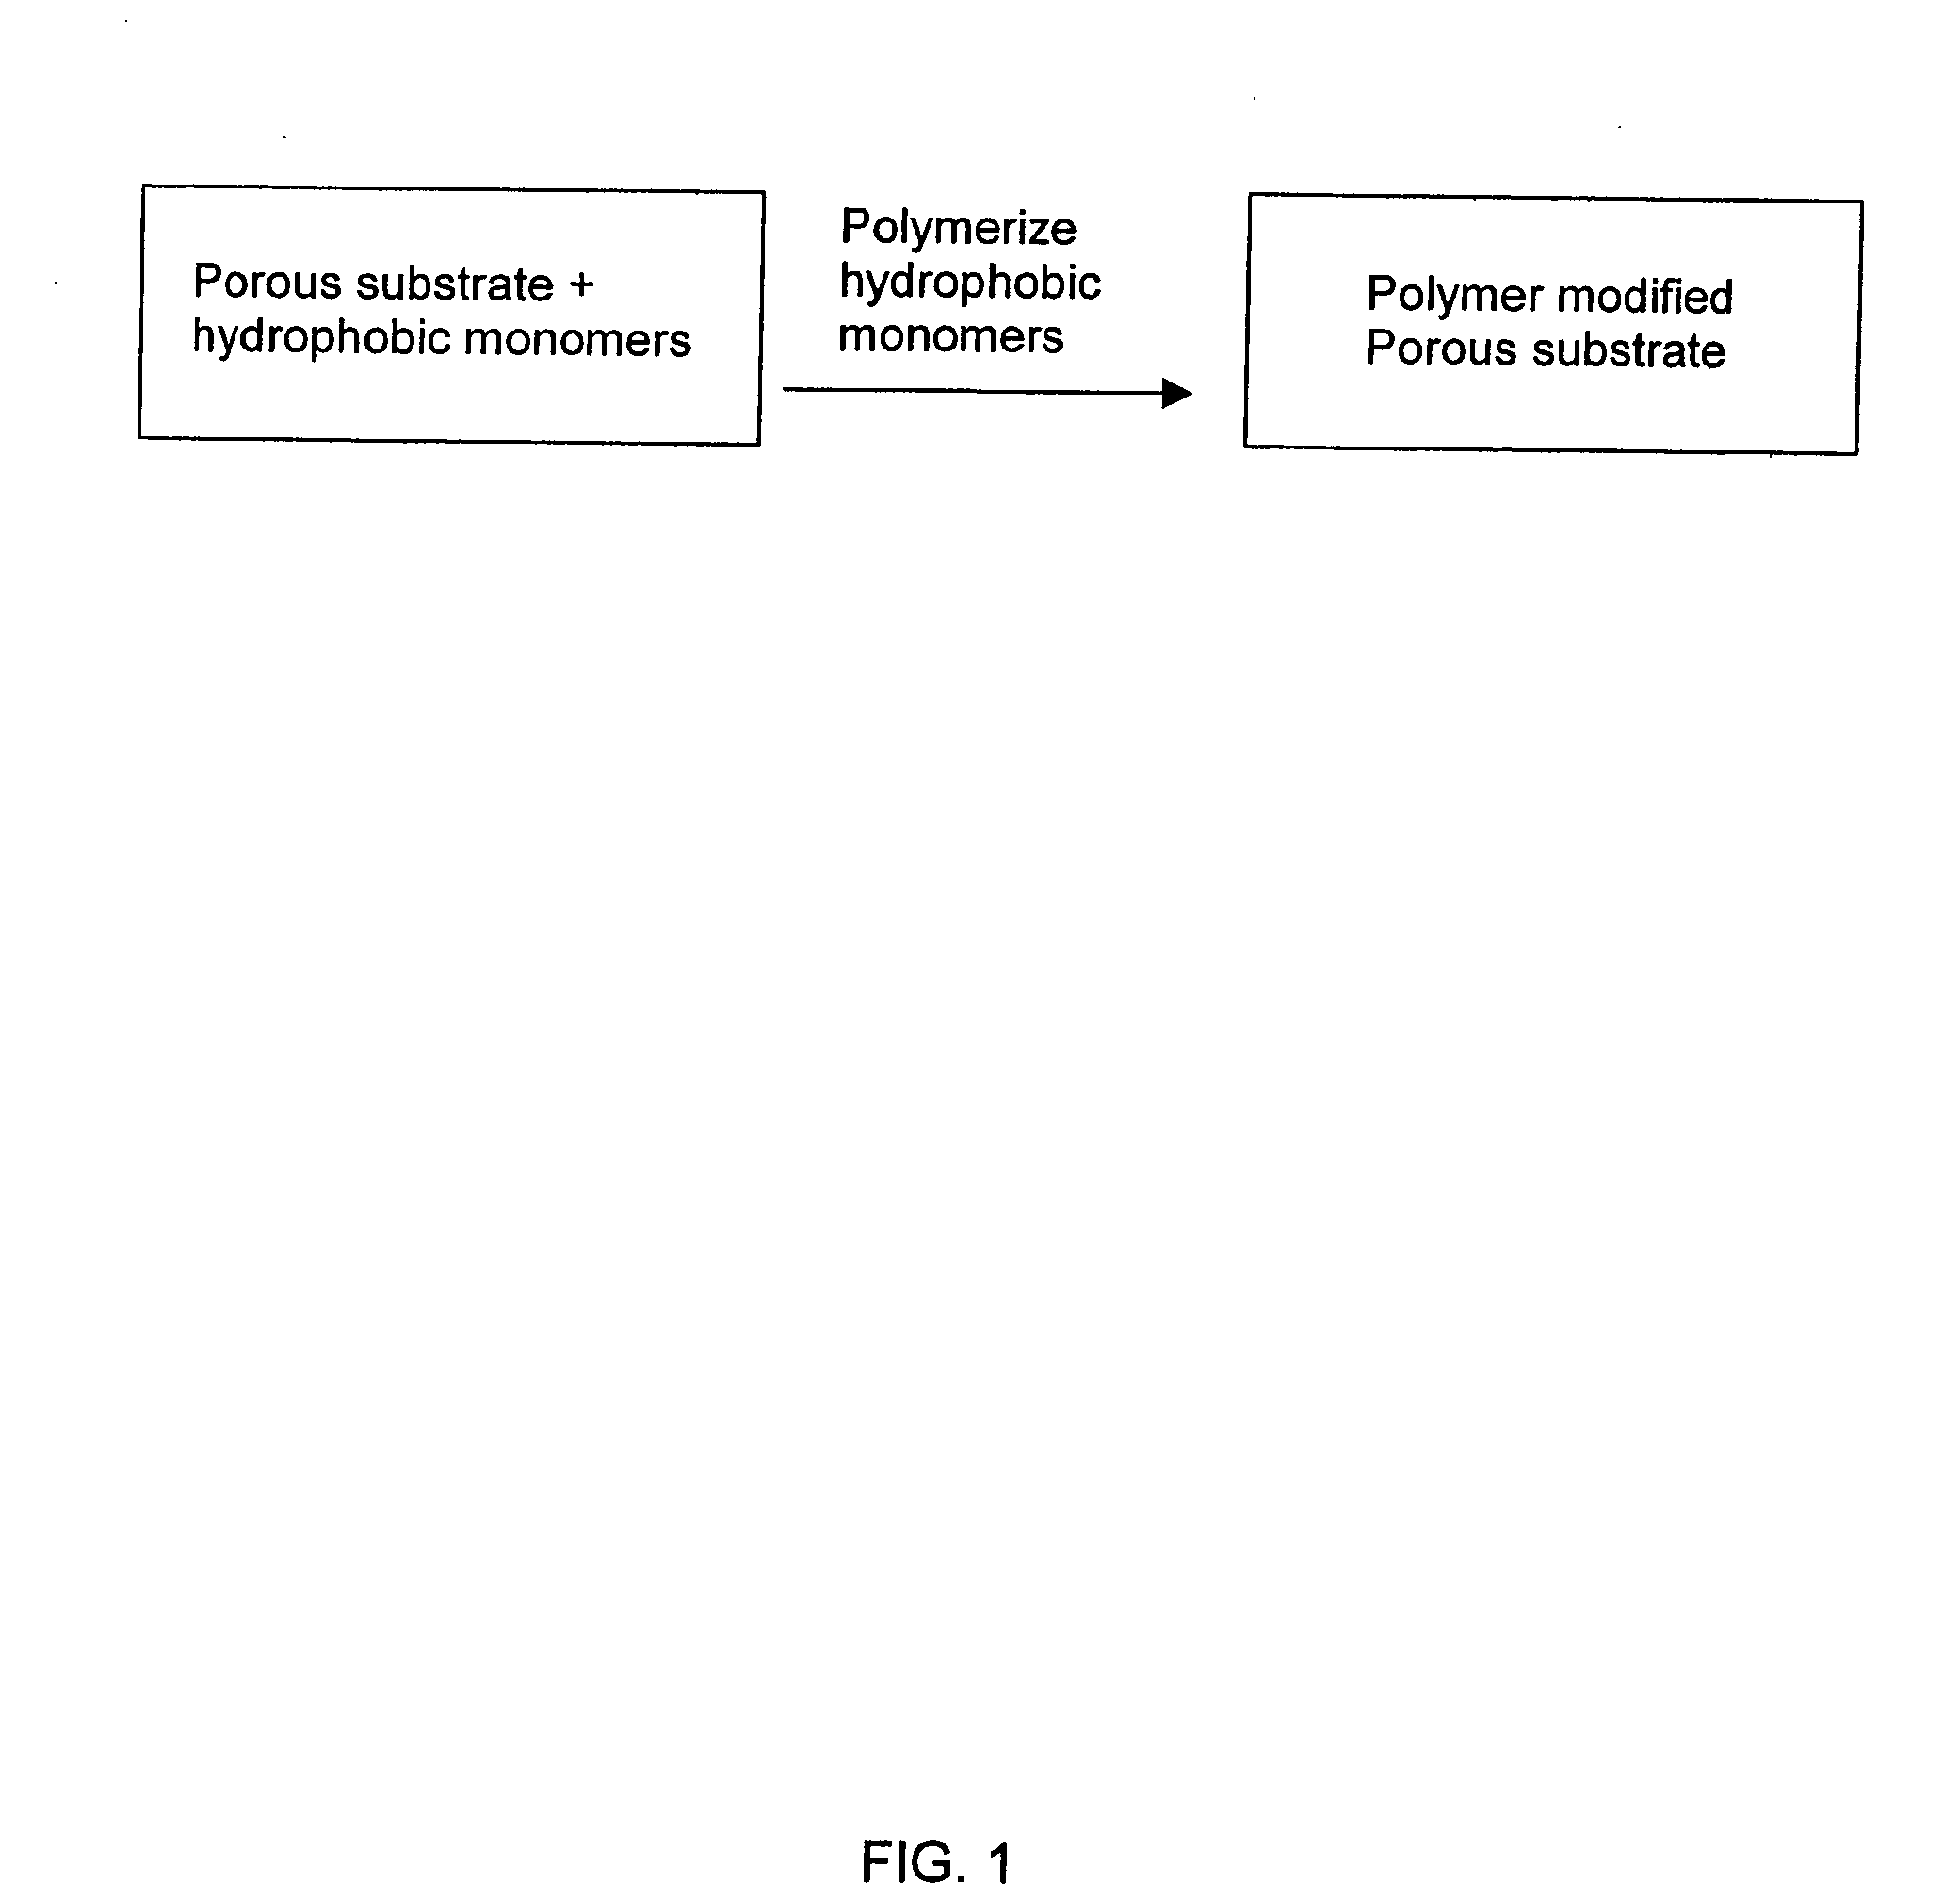 Polymer modified porous substrate for solid phase extraction